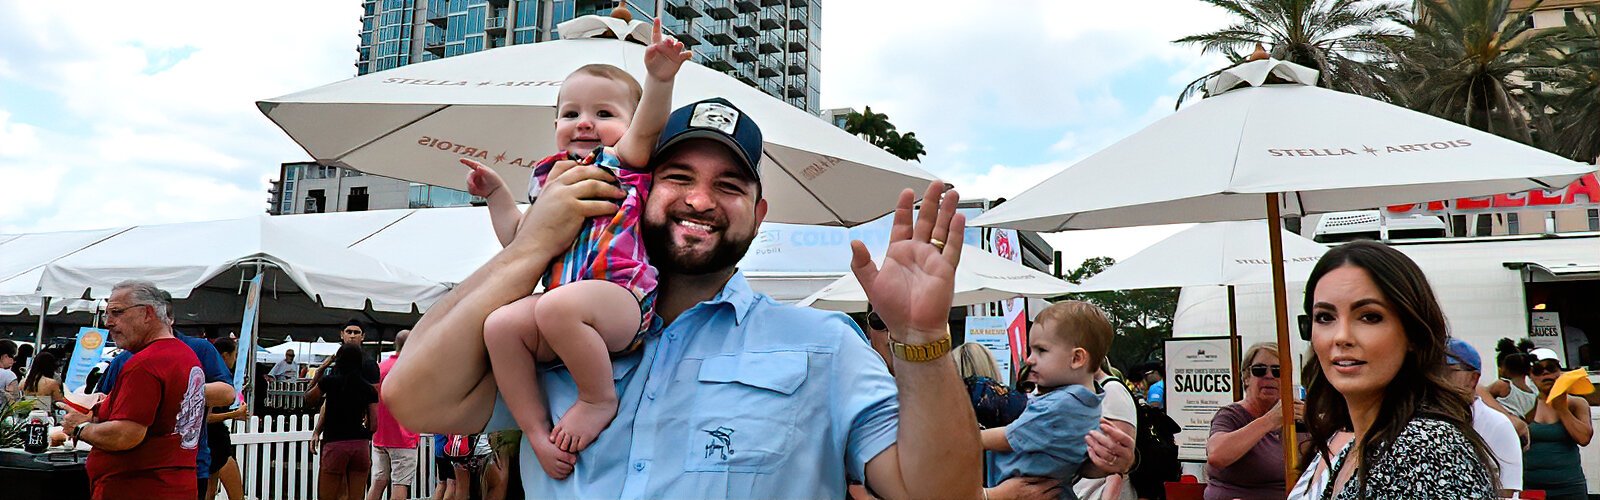  Danny and his one-year-old daughter, Harlyn, joyfully participate in Tampa Riverfest, an annual event produced by Friends of the Riverwalk that features family-friendly activities, marketing/promo tents, musicians and more.